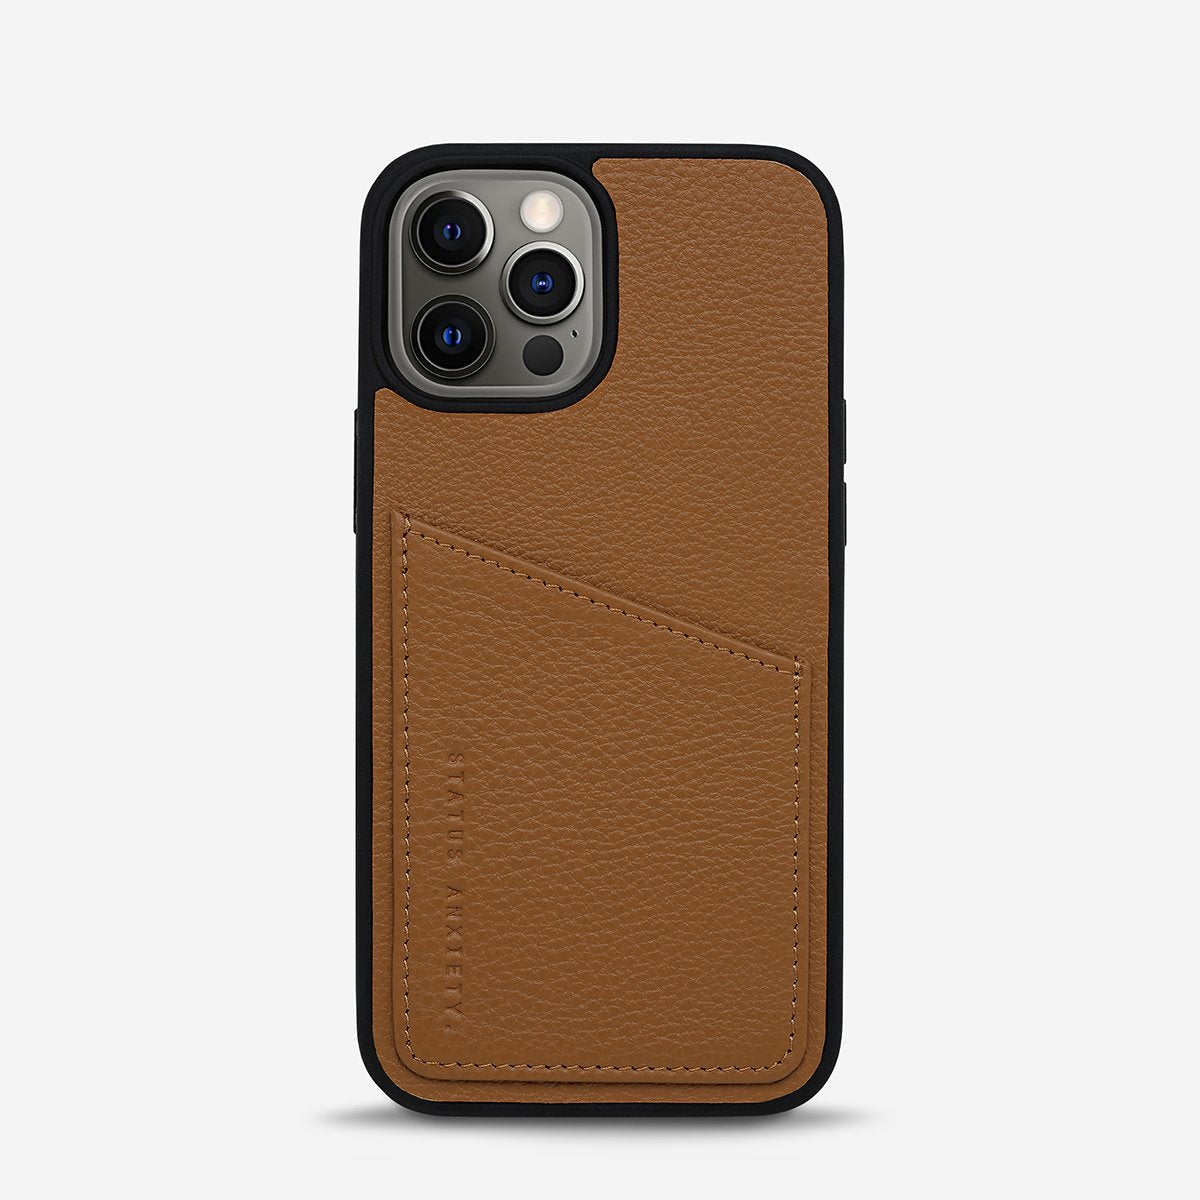 Who's Who Leather iPhone Case in Tan